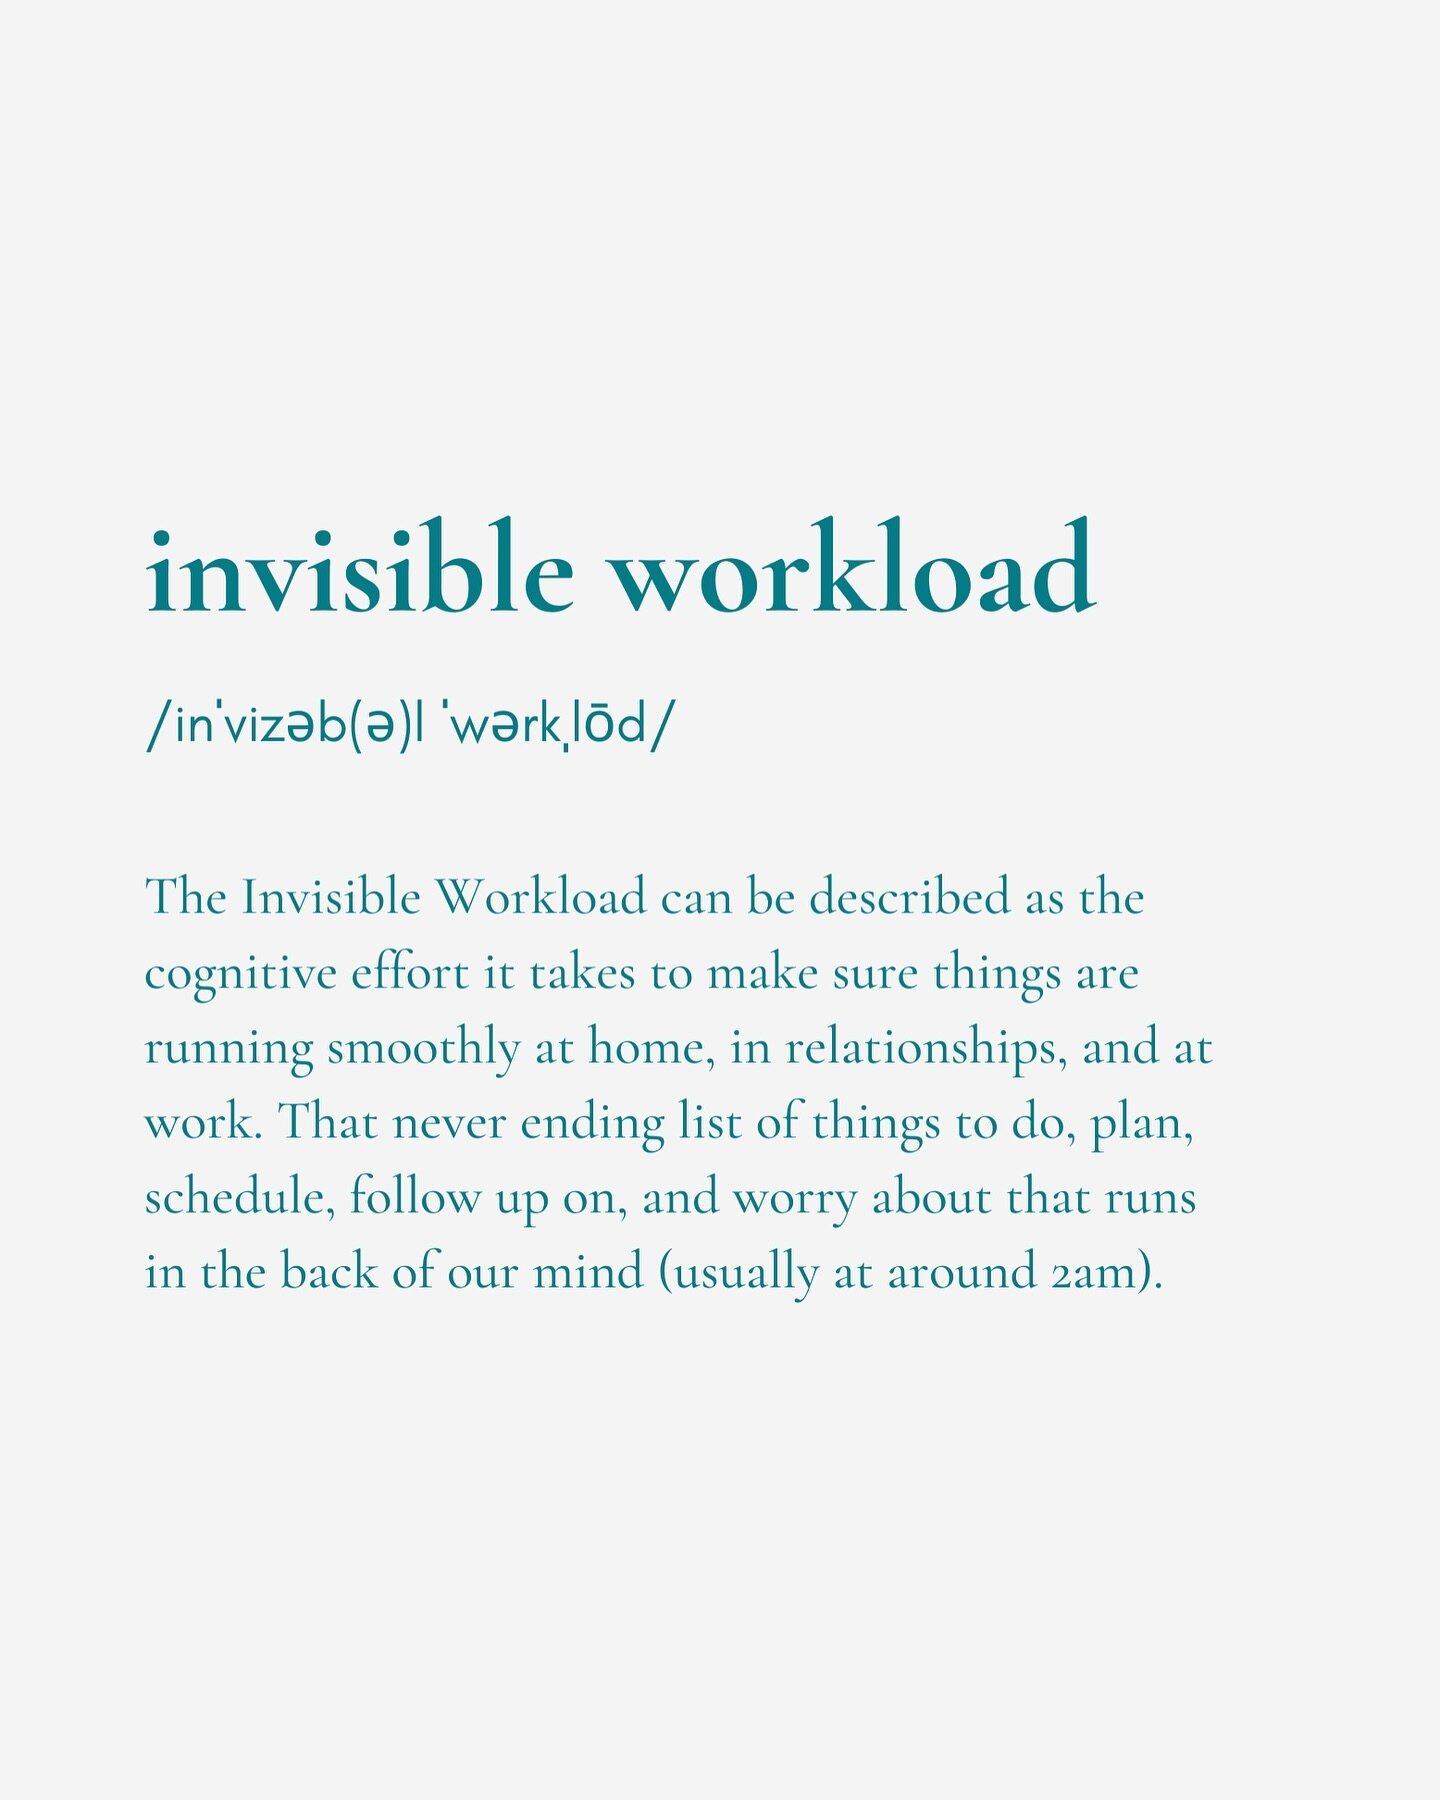 The Invisible Workload can be described as the cognitive effort it takes to make sure things are running smoothly at home, in relationships, and at work. That never ending list of things to do, plan, schedule, follow up on, and worry about that runs 